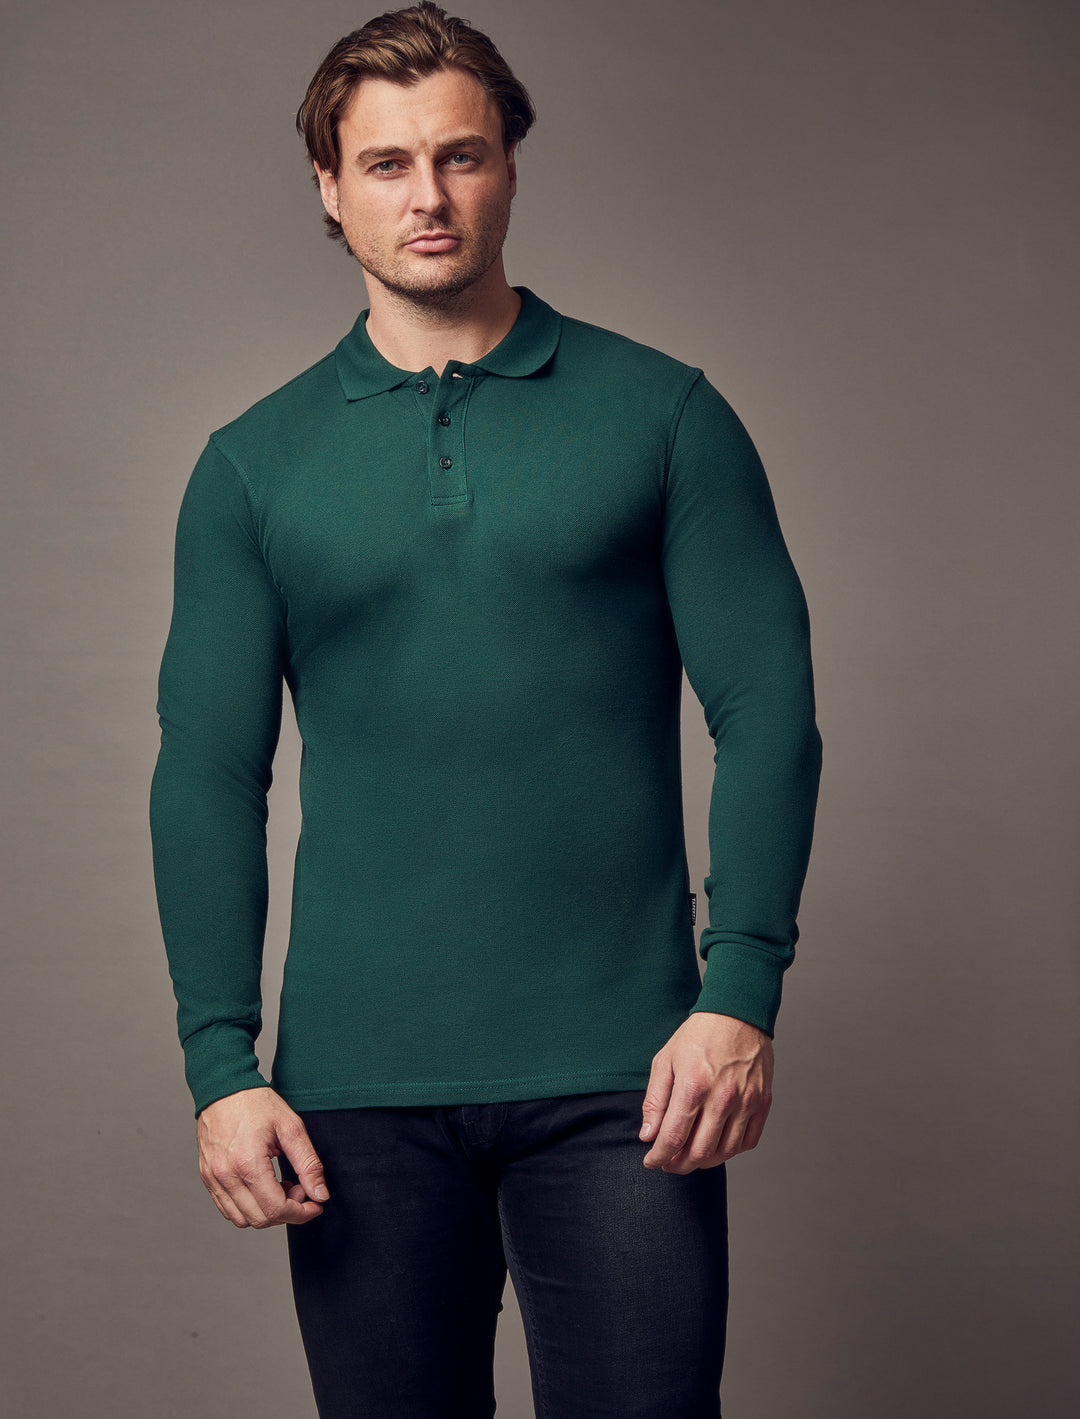 Green long-sleeve polo shirt with a tapered fit from Tapered Menswear, highlighting muscle fit attributes for a flattering and well-defined appearance.